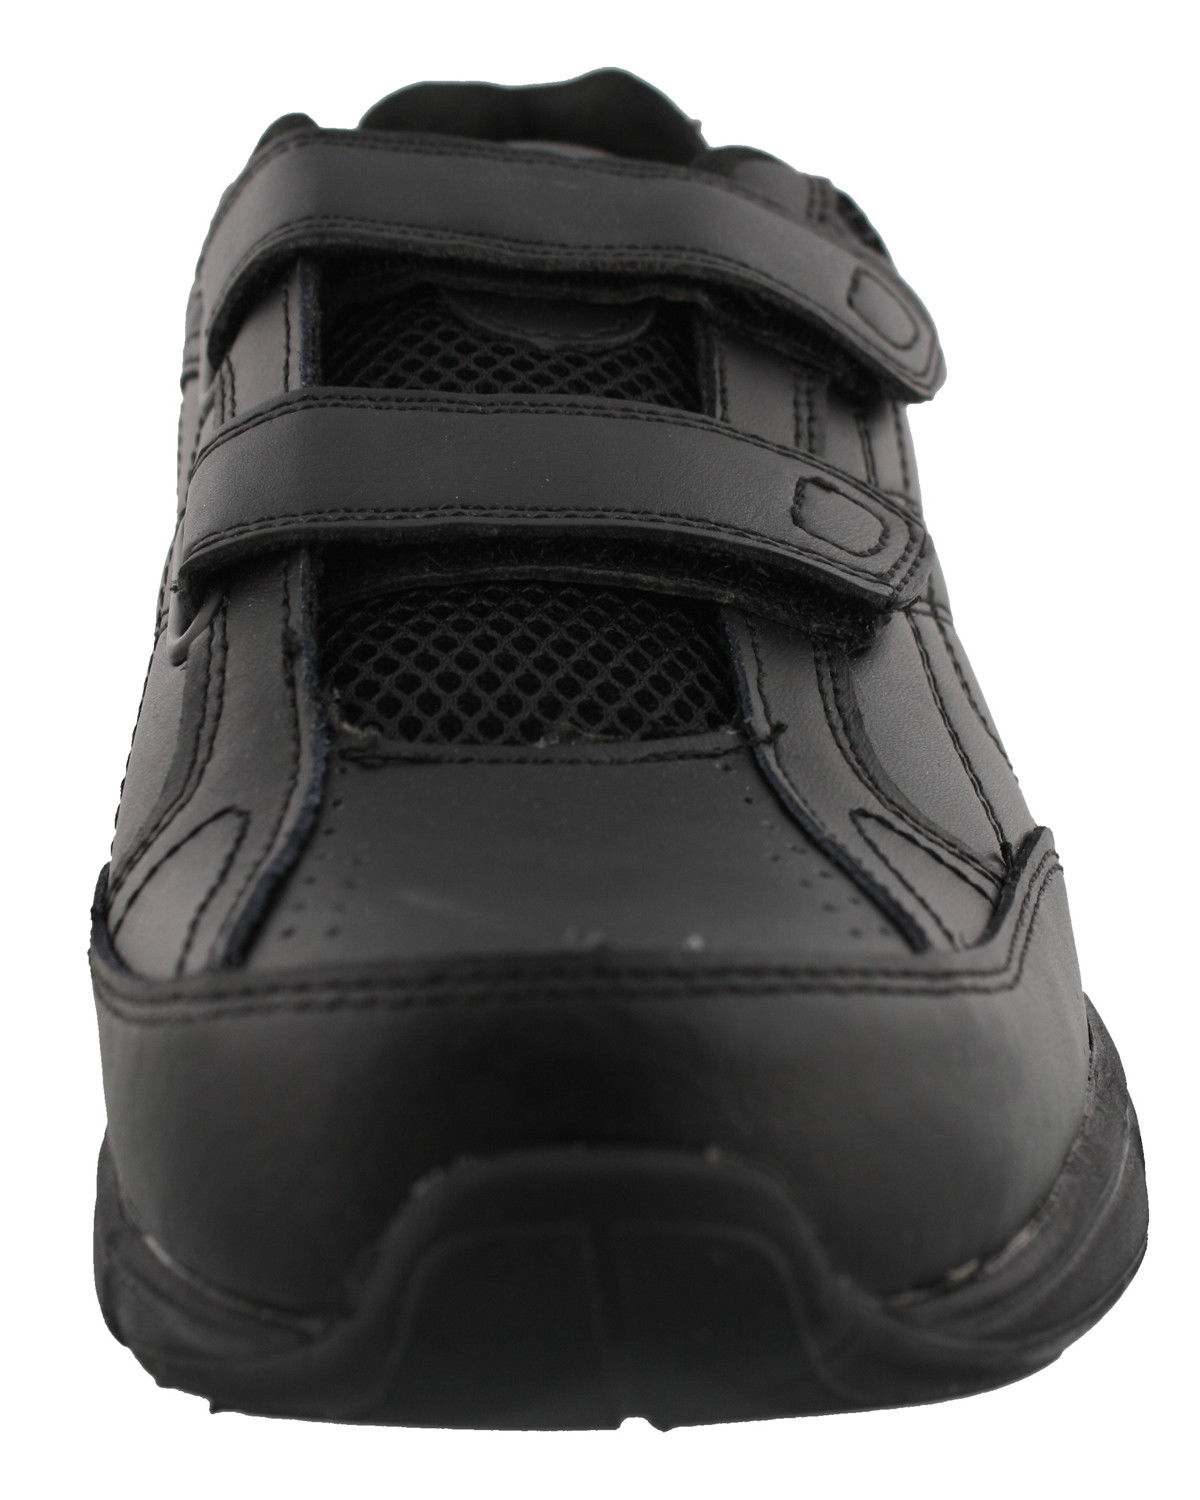 Dr. Scholl's Men's Brisk Sneakers (Wide Width Available) - image 4 of 5